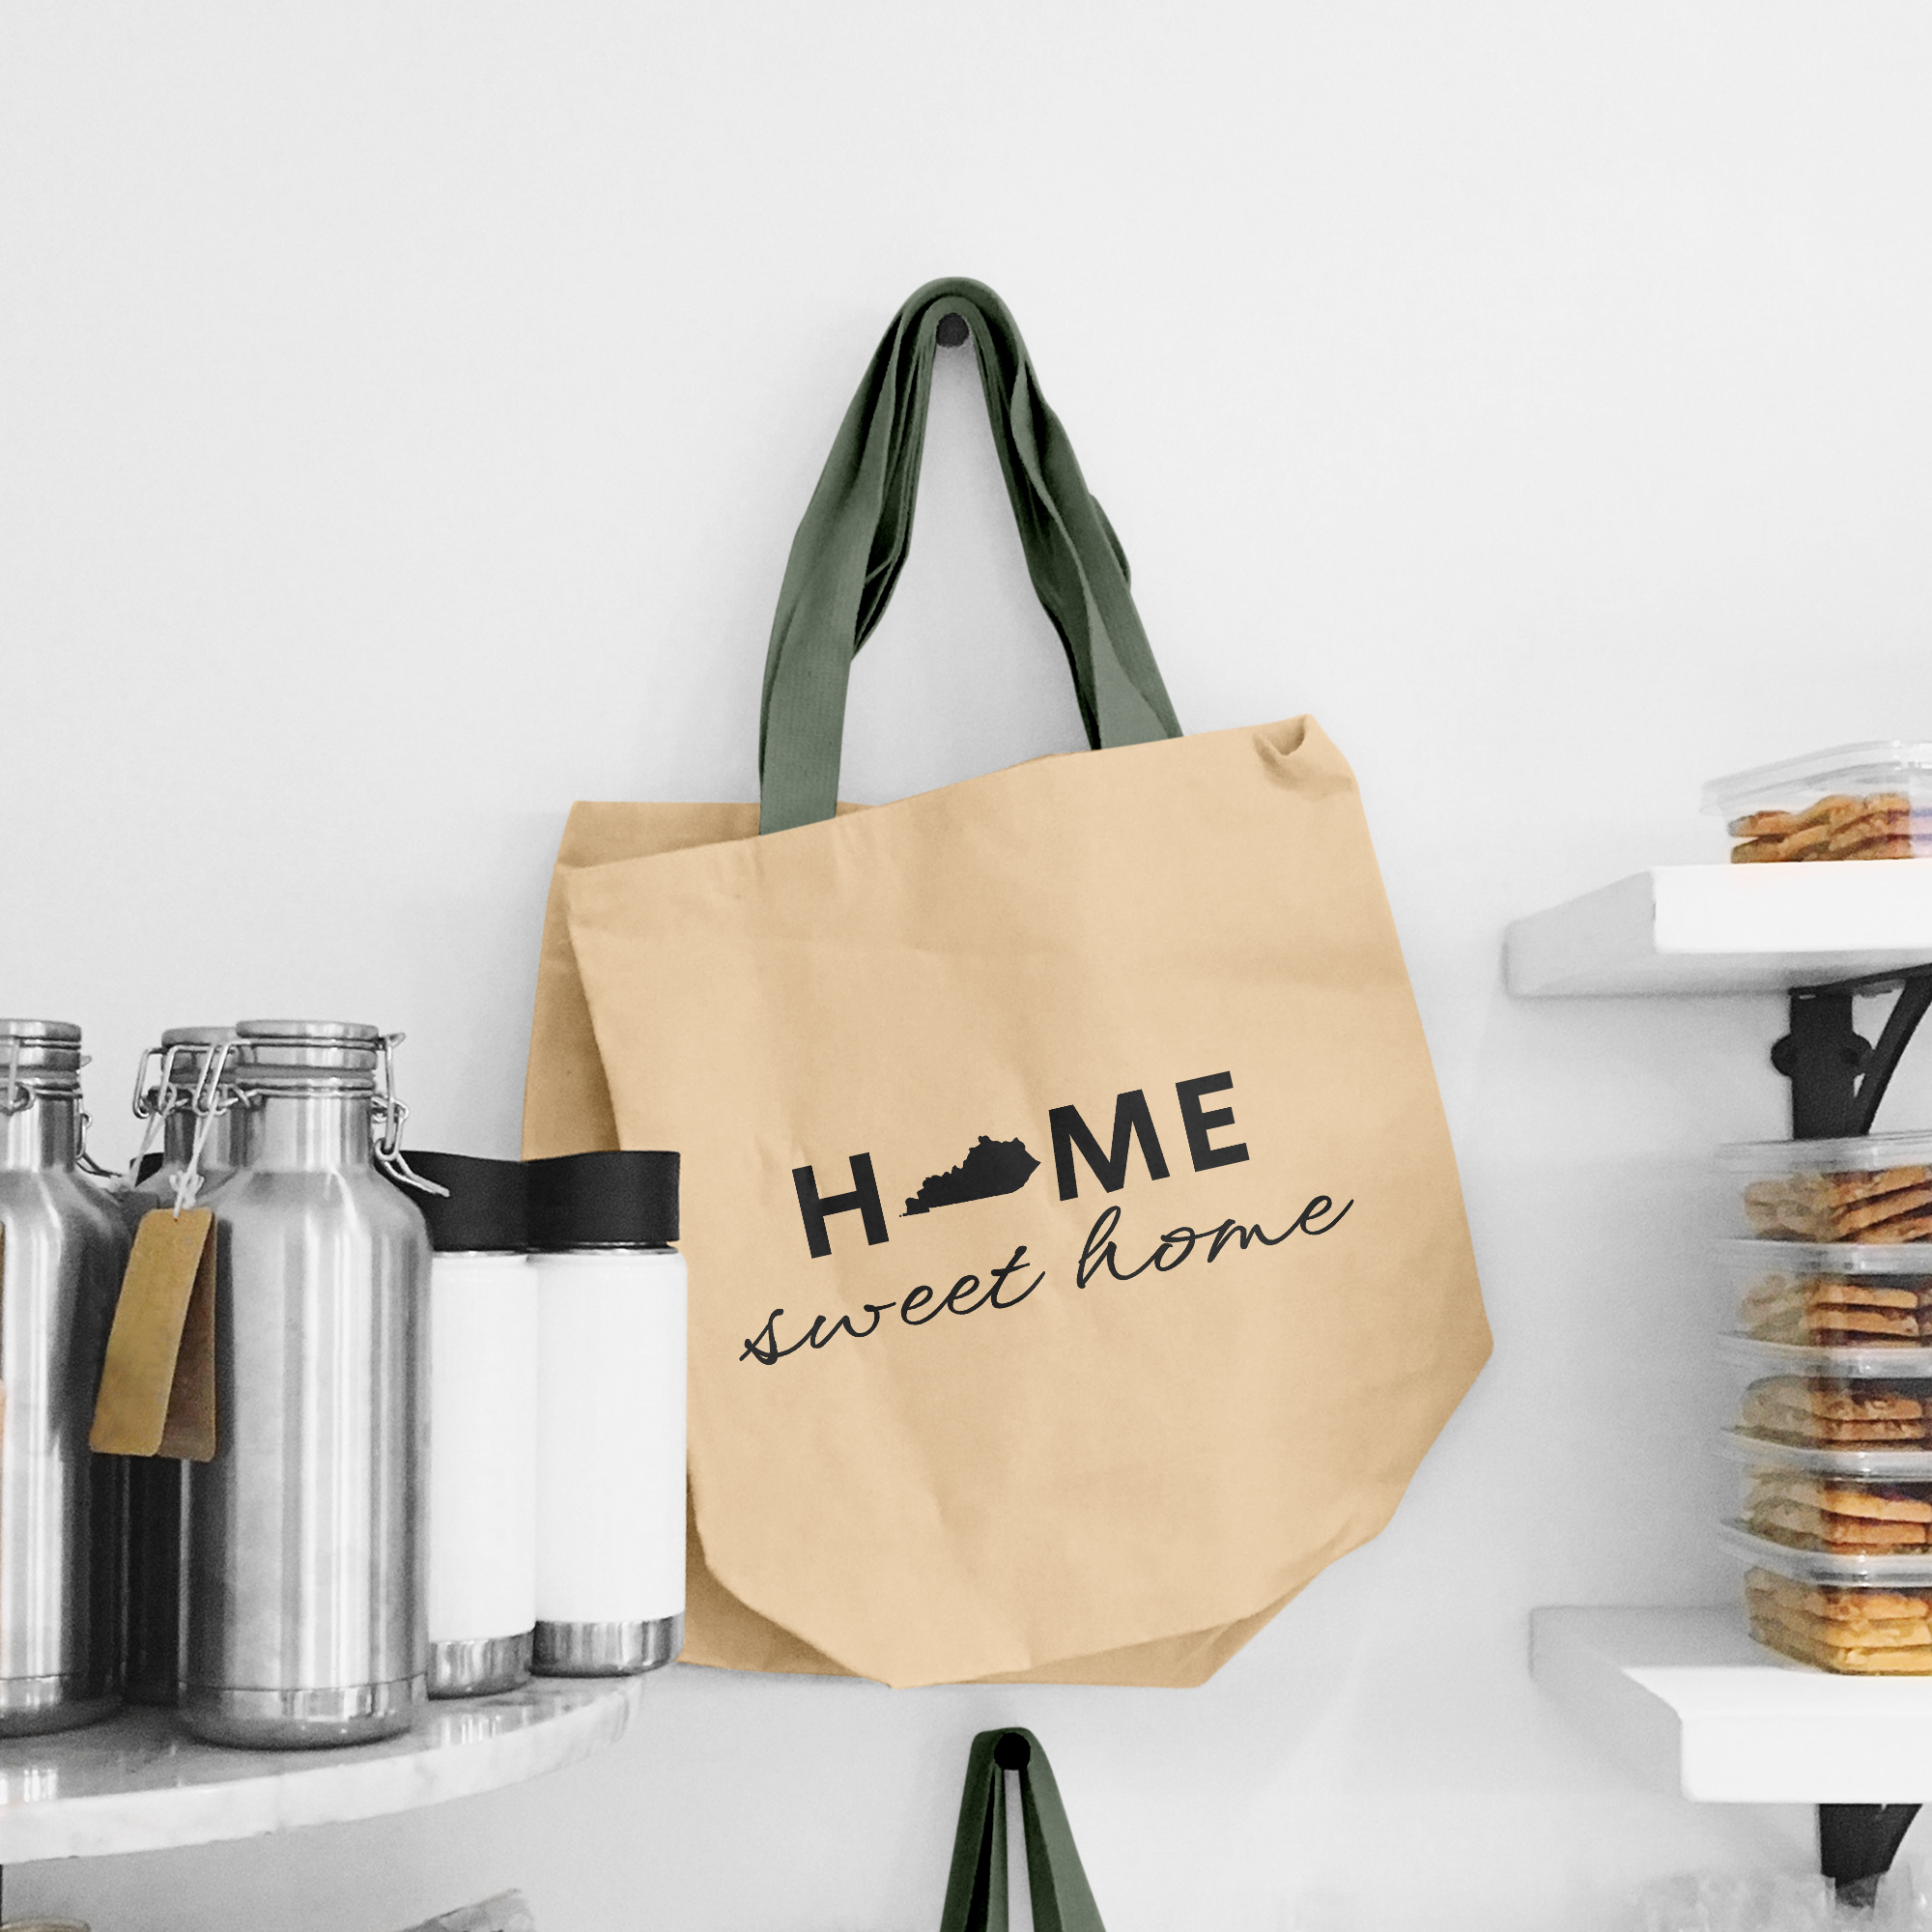 Black lettering "Home sweet home" on the beige shopping bag with dirty green handle.